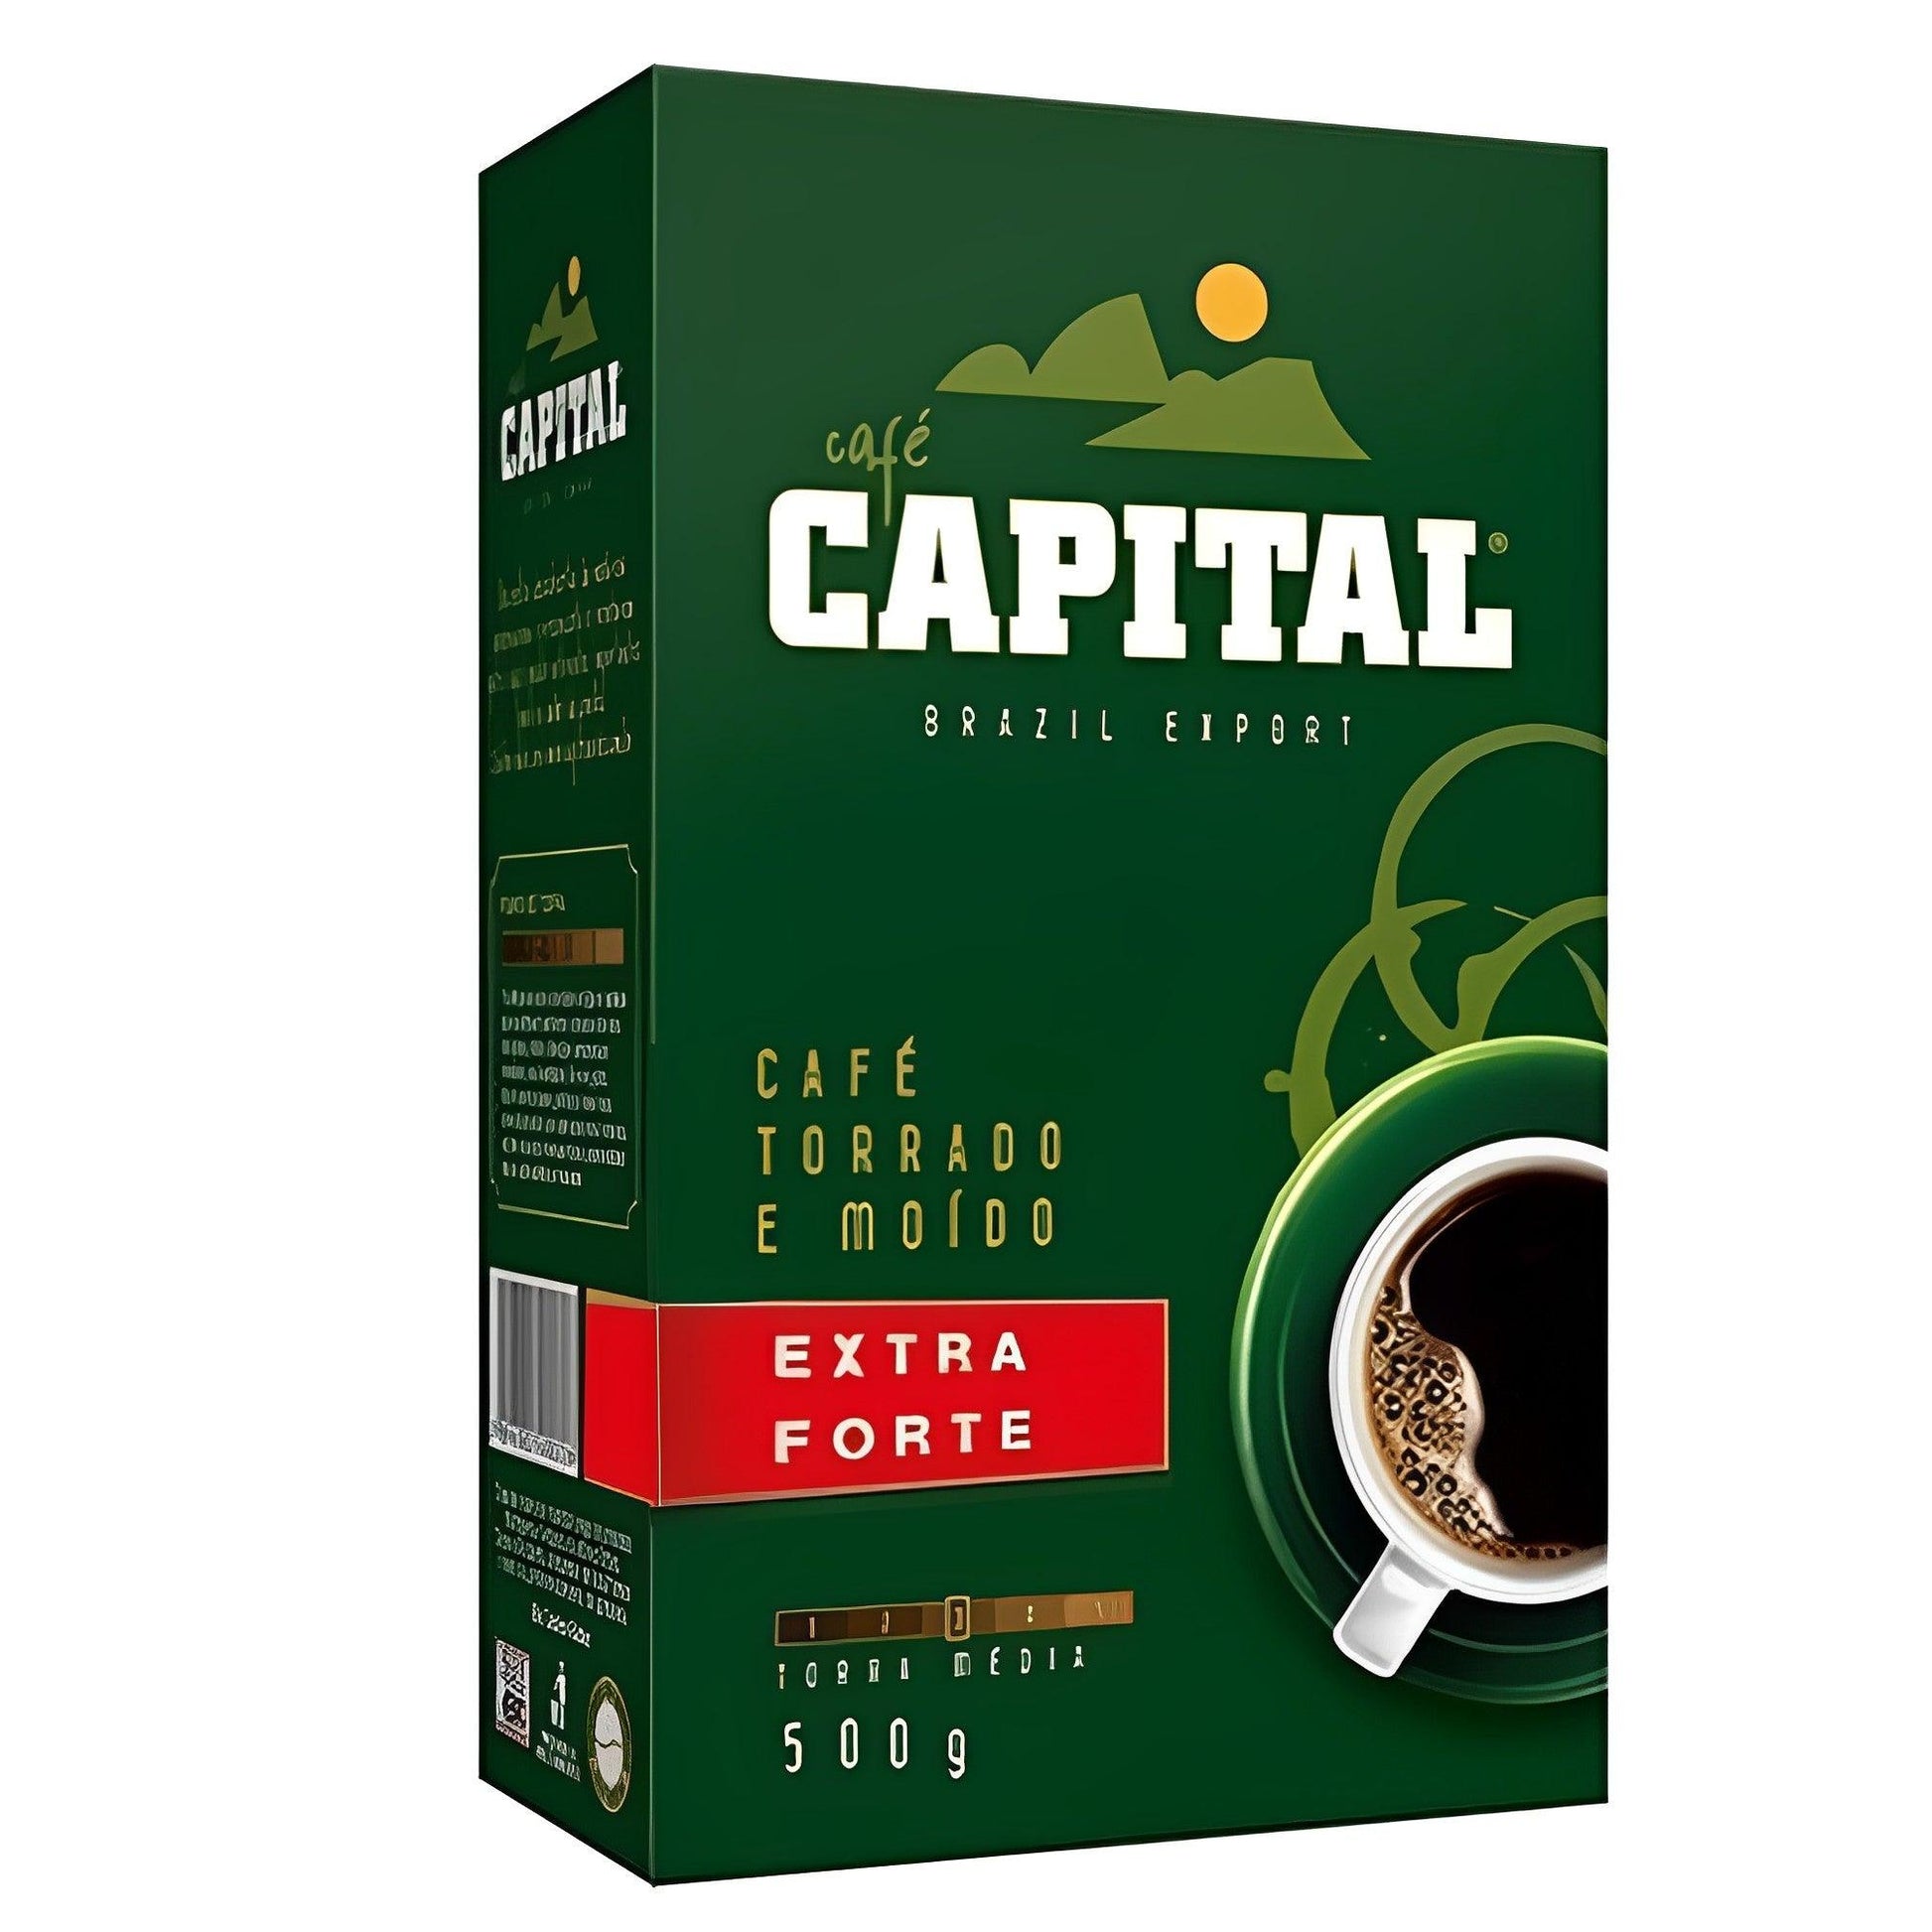 Café Capital Extra Strong Vacuum-Packed 17.64 oz. (Pack of 2) - Brazilian Shop